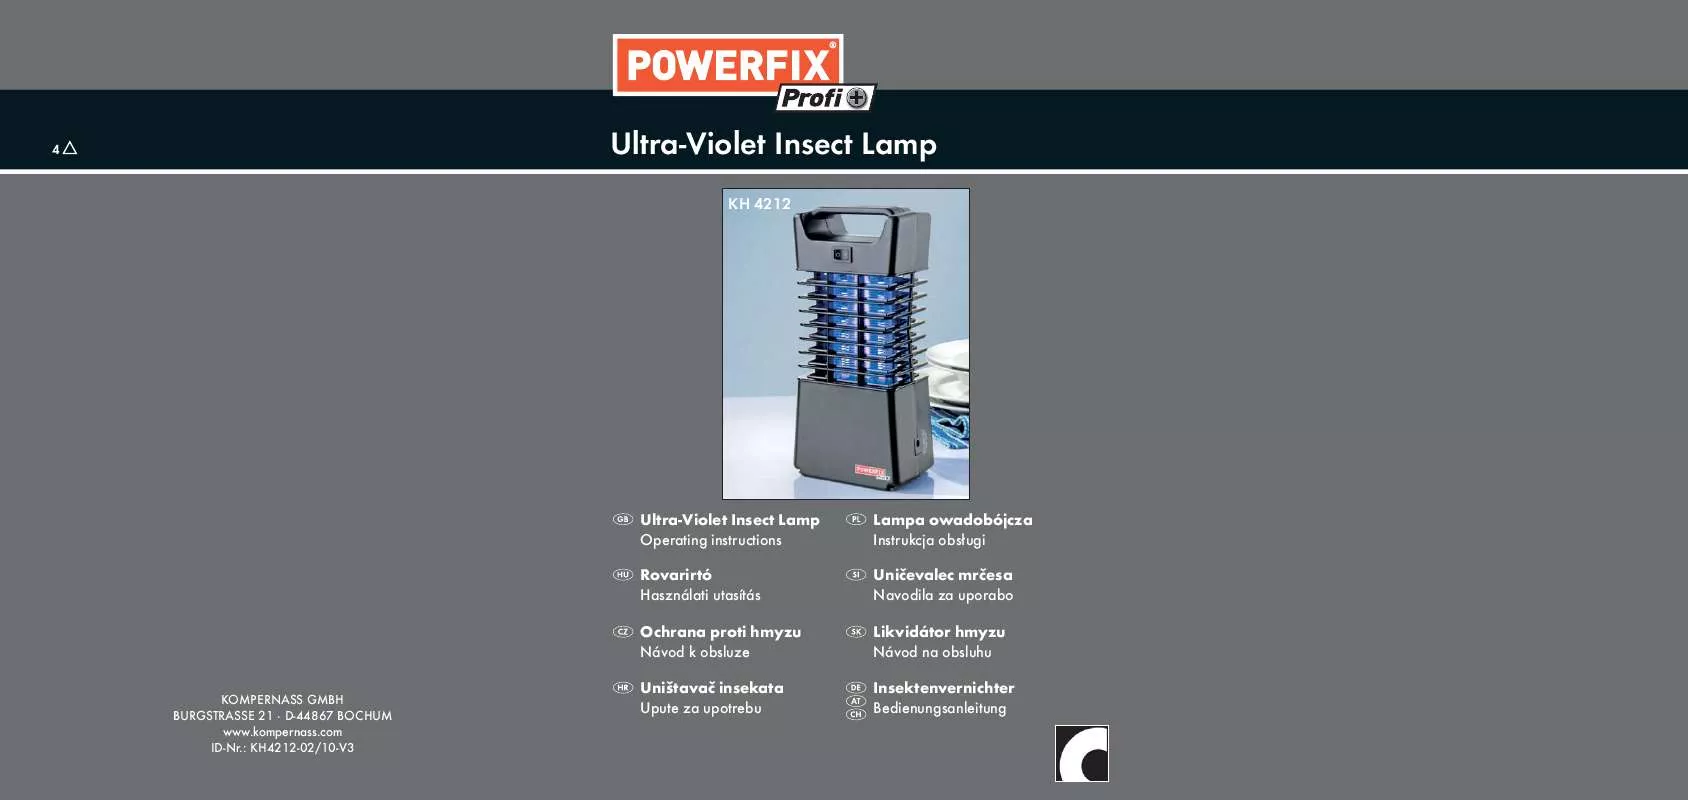 Mode d'emploi POWERFIX KH 4212 ULTRA-VIOLET INSECT LAMP